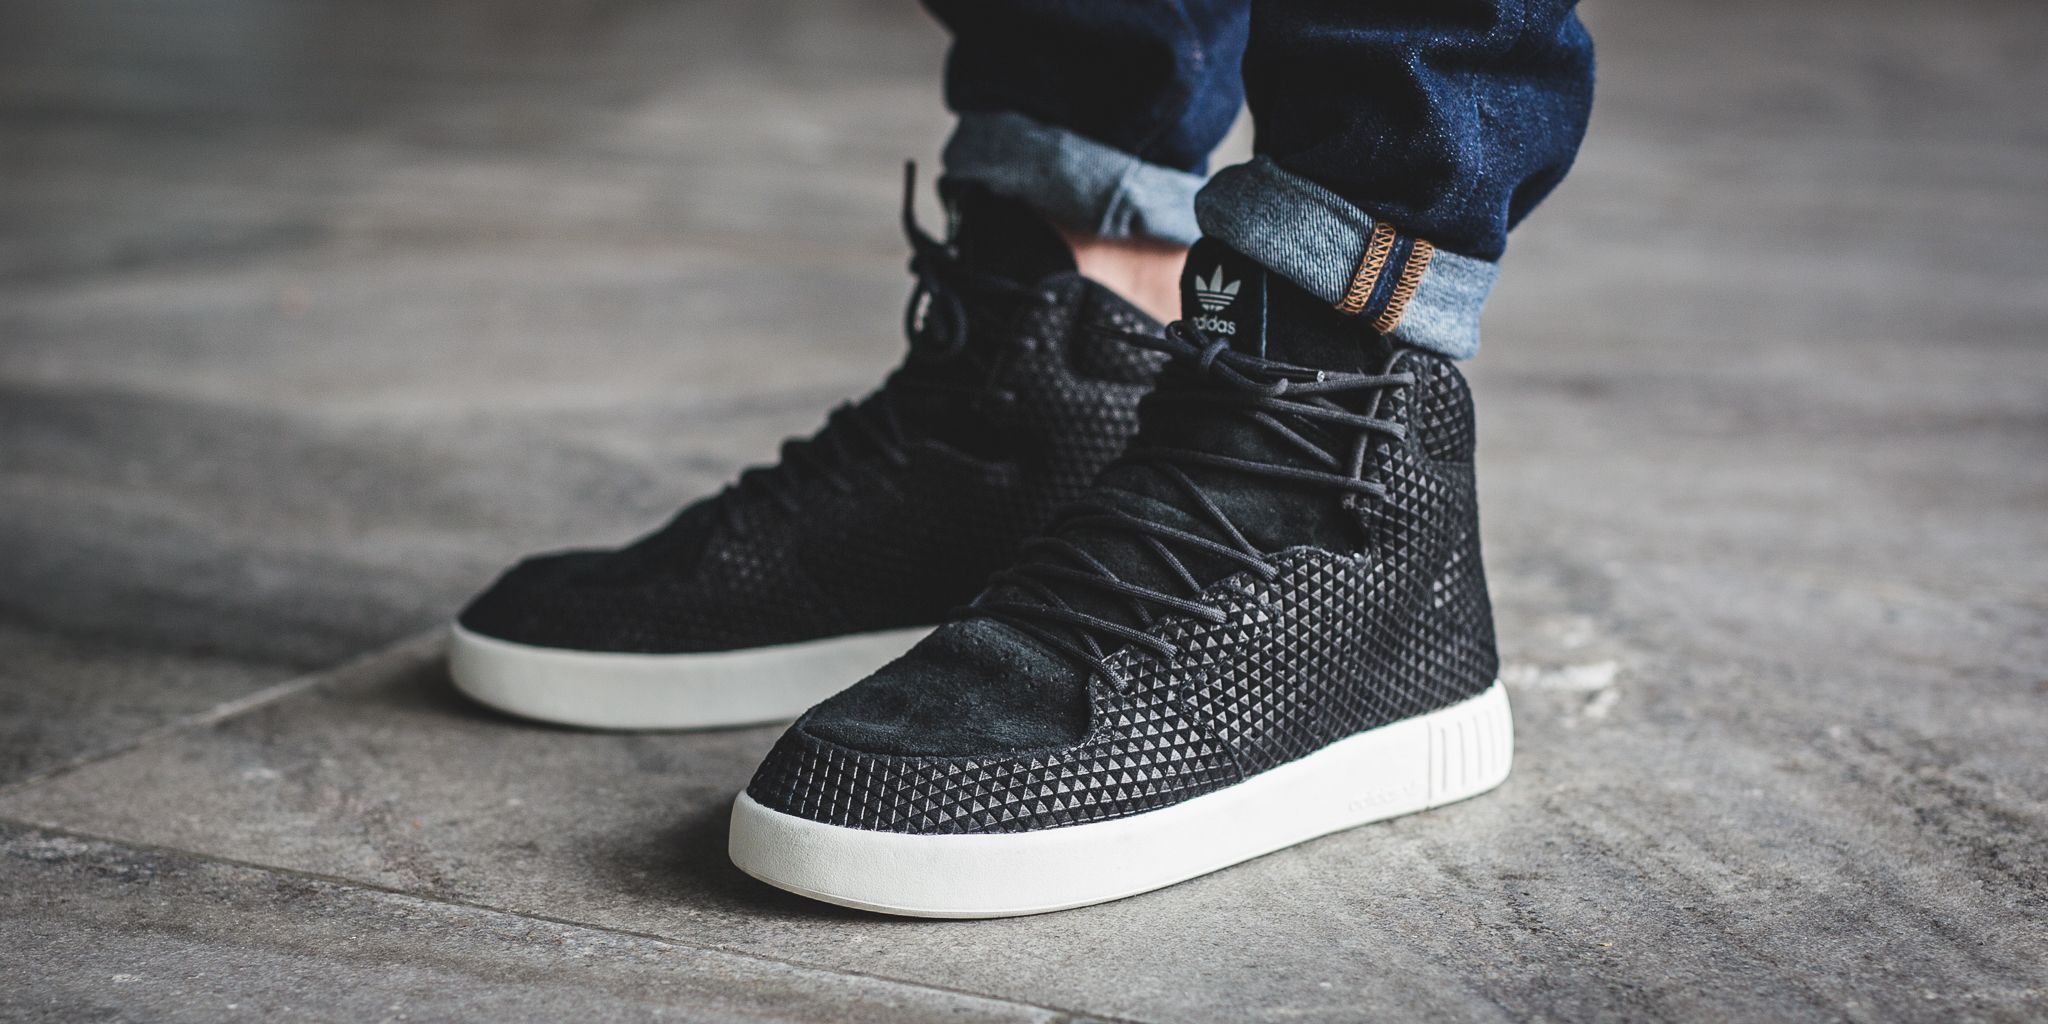 Titolo on Twitter: "ONLINE NOW! Adidas Tubular Invader 2.0 - Core Black/Off White SHOP HERE: https://t.co/tipsc4CcZ9 # tubular https://t.co/yGTzb2LyuS" / Twitter